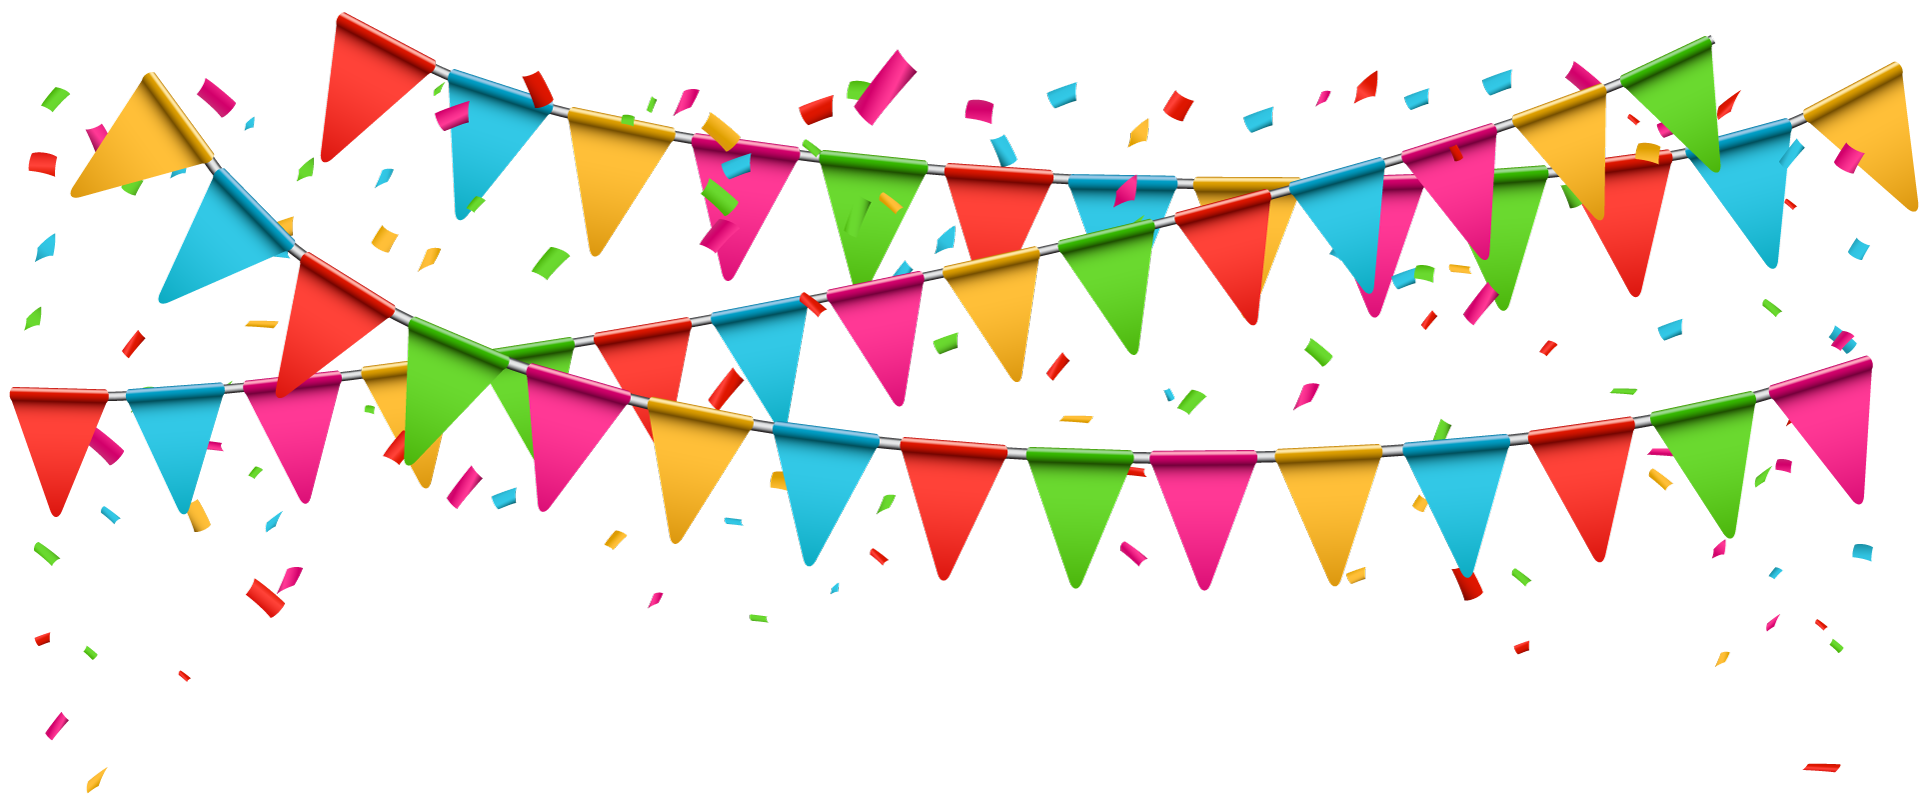 Party Birthday Clip Art Party Png Transparent Png Download 1920805